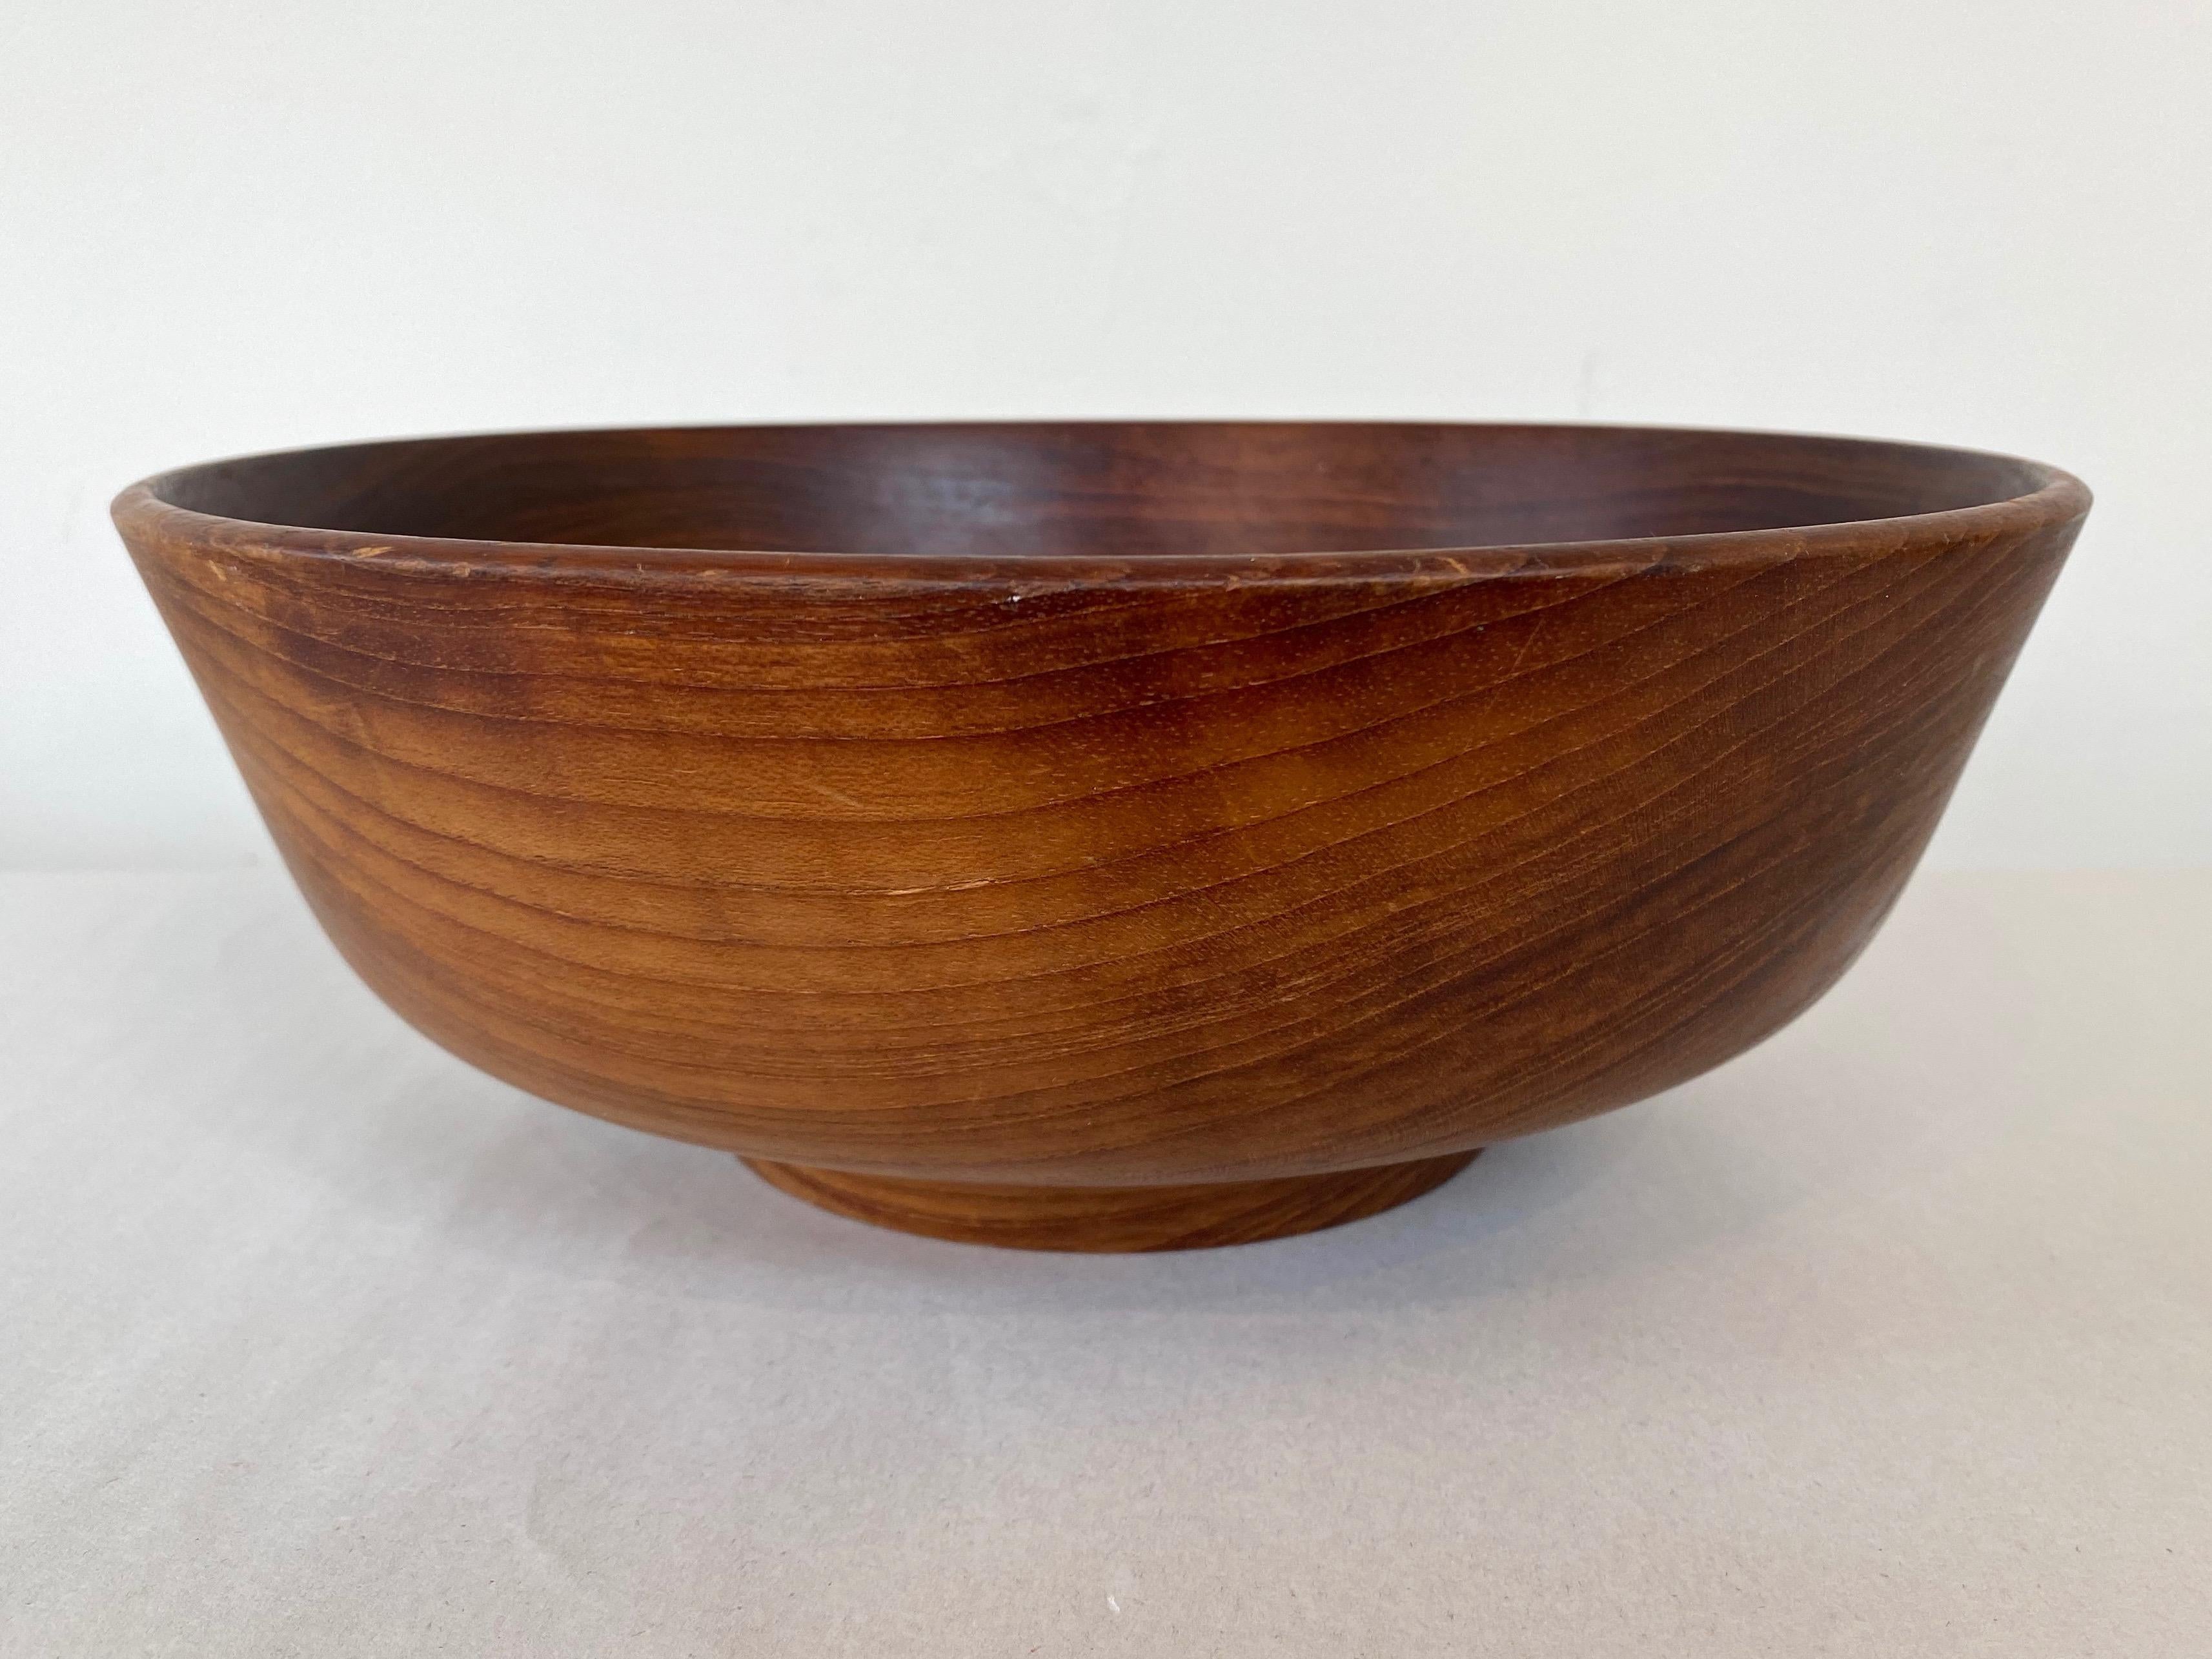 American Bob Stocksdale Teak Turned Wood Bowl with Exceptional Grain Pattern, Early 1970s For Sale